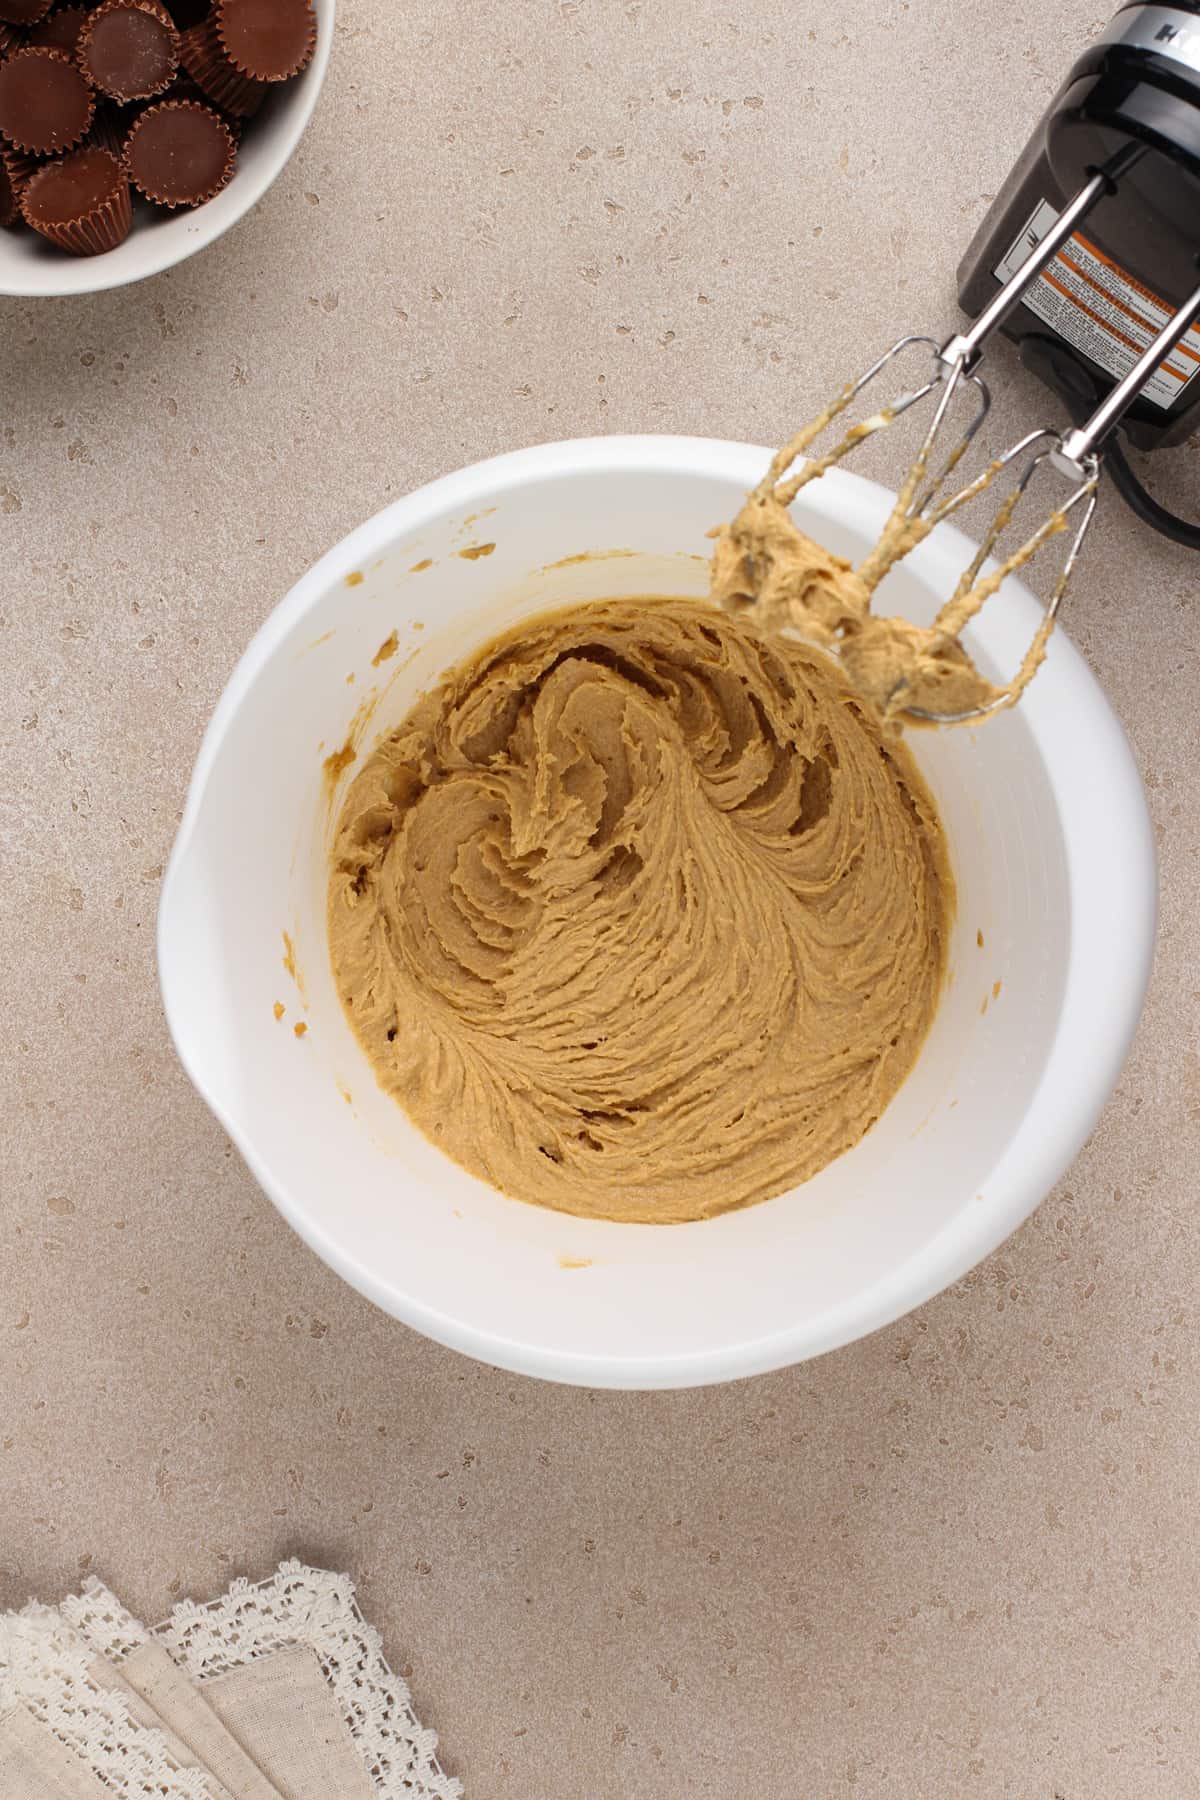 Butter, sugar, and peanut butter creamed together in a white mixing bowl.